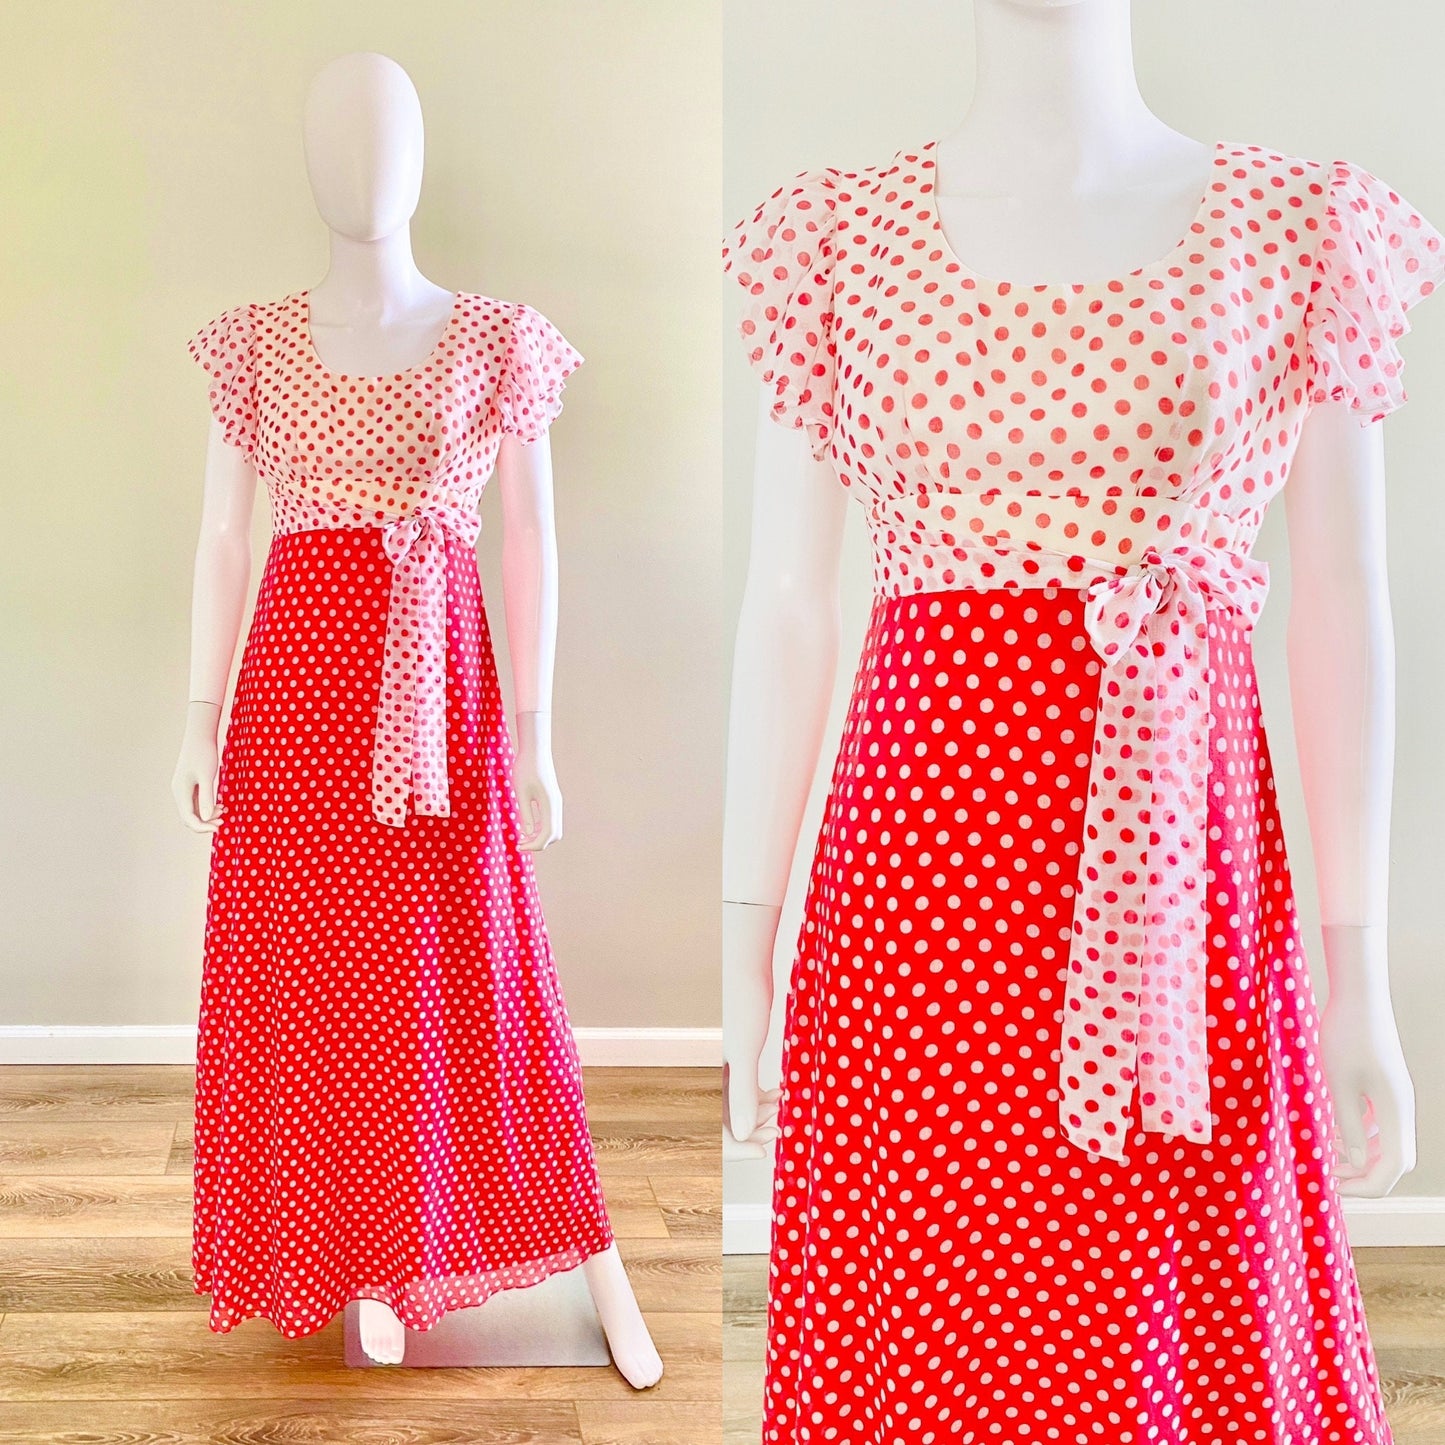 Vintage 1970s Red Polka Dot Maxi Dress / 70s does 1930s party dress / prom dress / size S